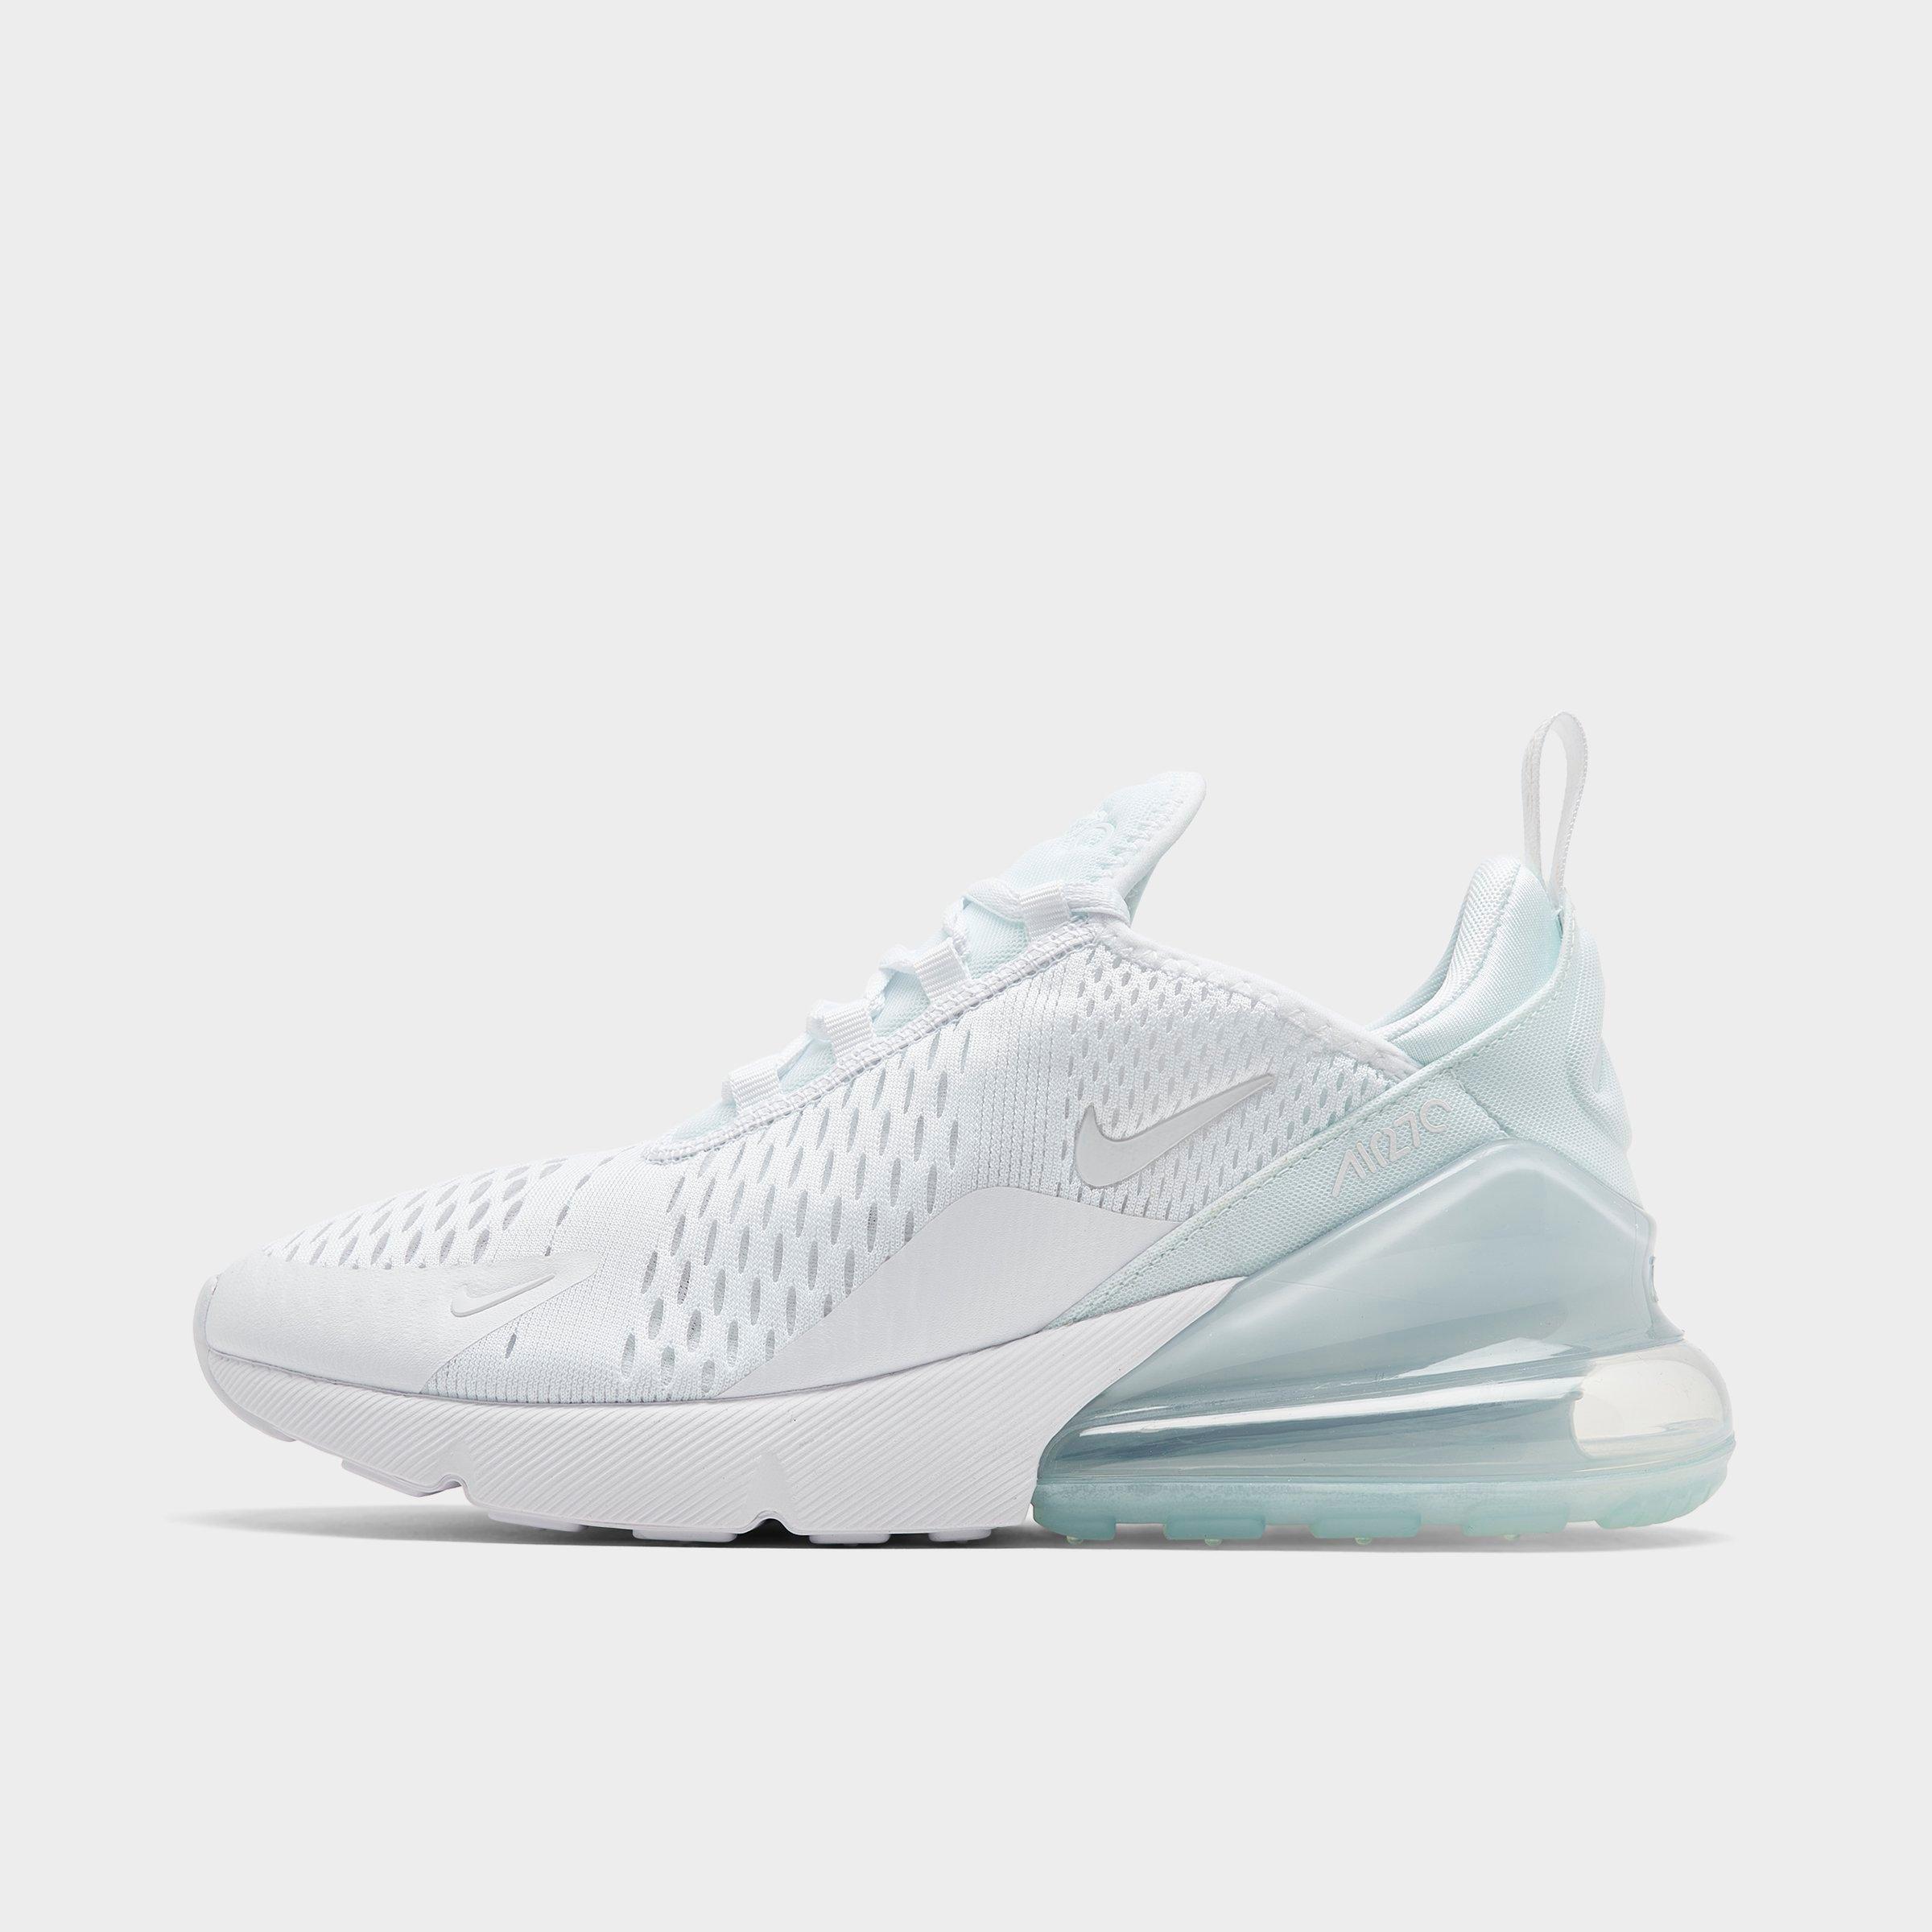 how much are air max 270s